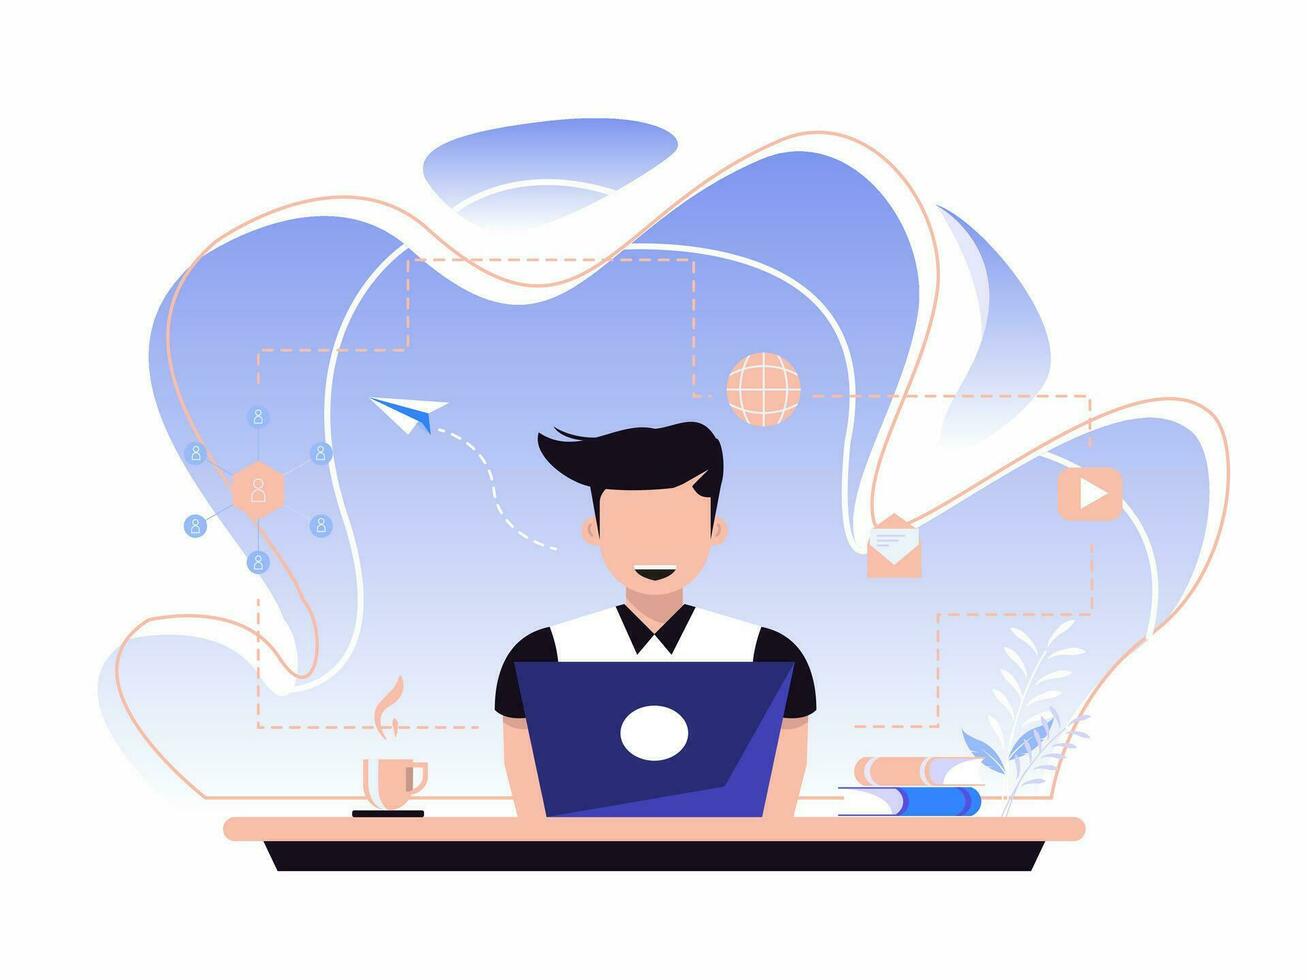 Online video podcast. Woman delivering news in front of a laptop screen with the widest internet network. Vector illustration for video conferencing, technological concepts.